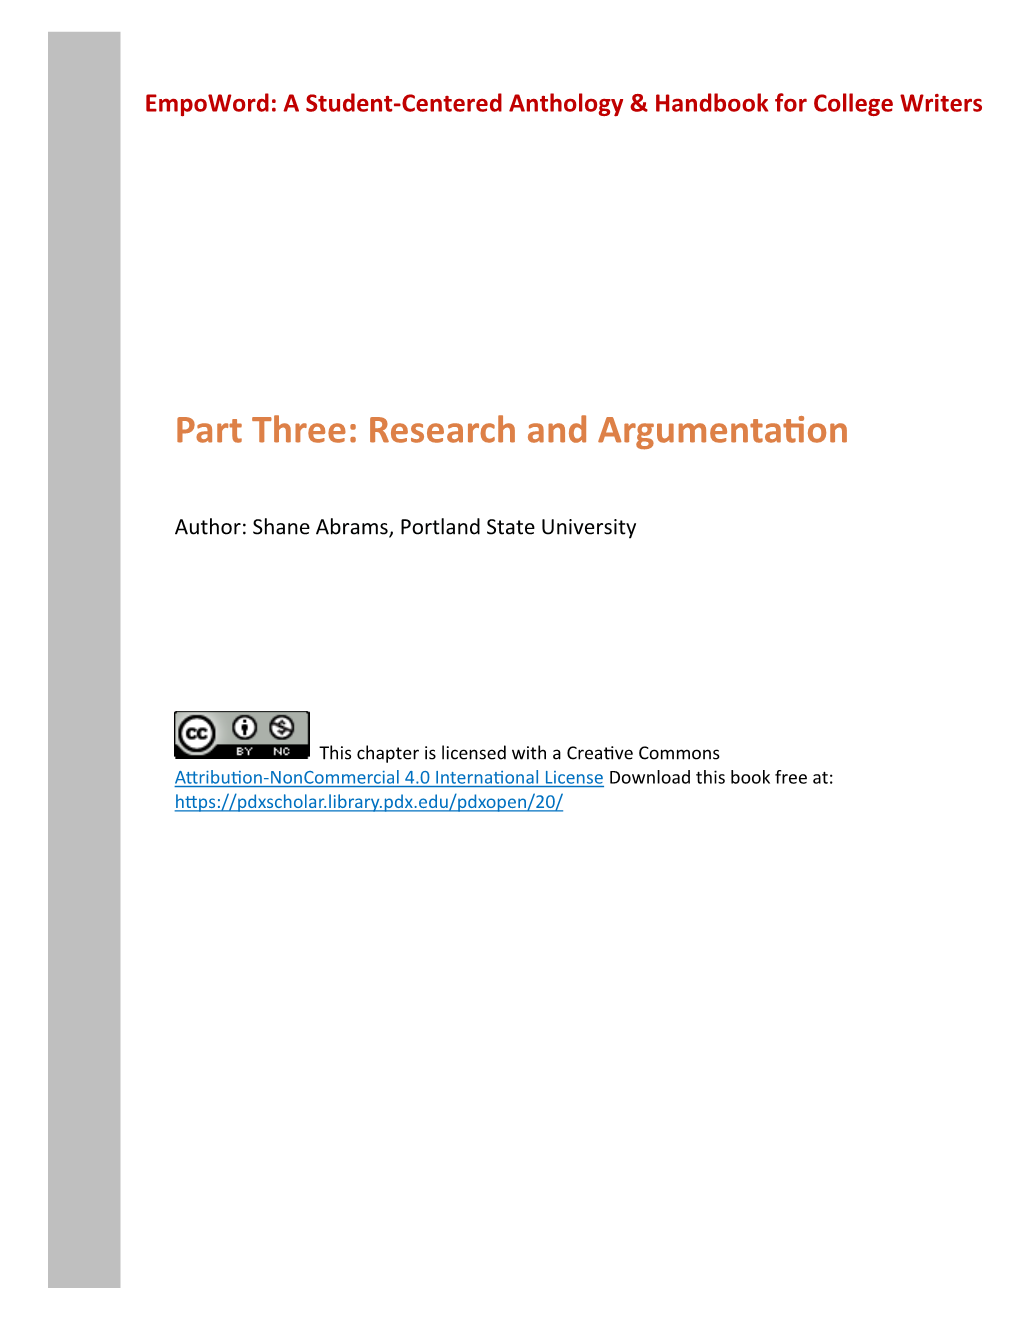 Research and Argumentation